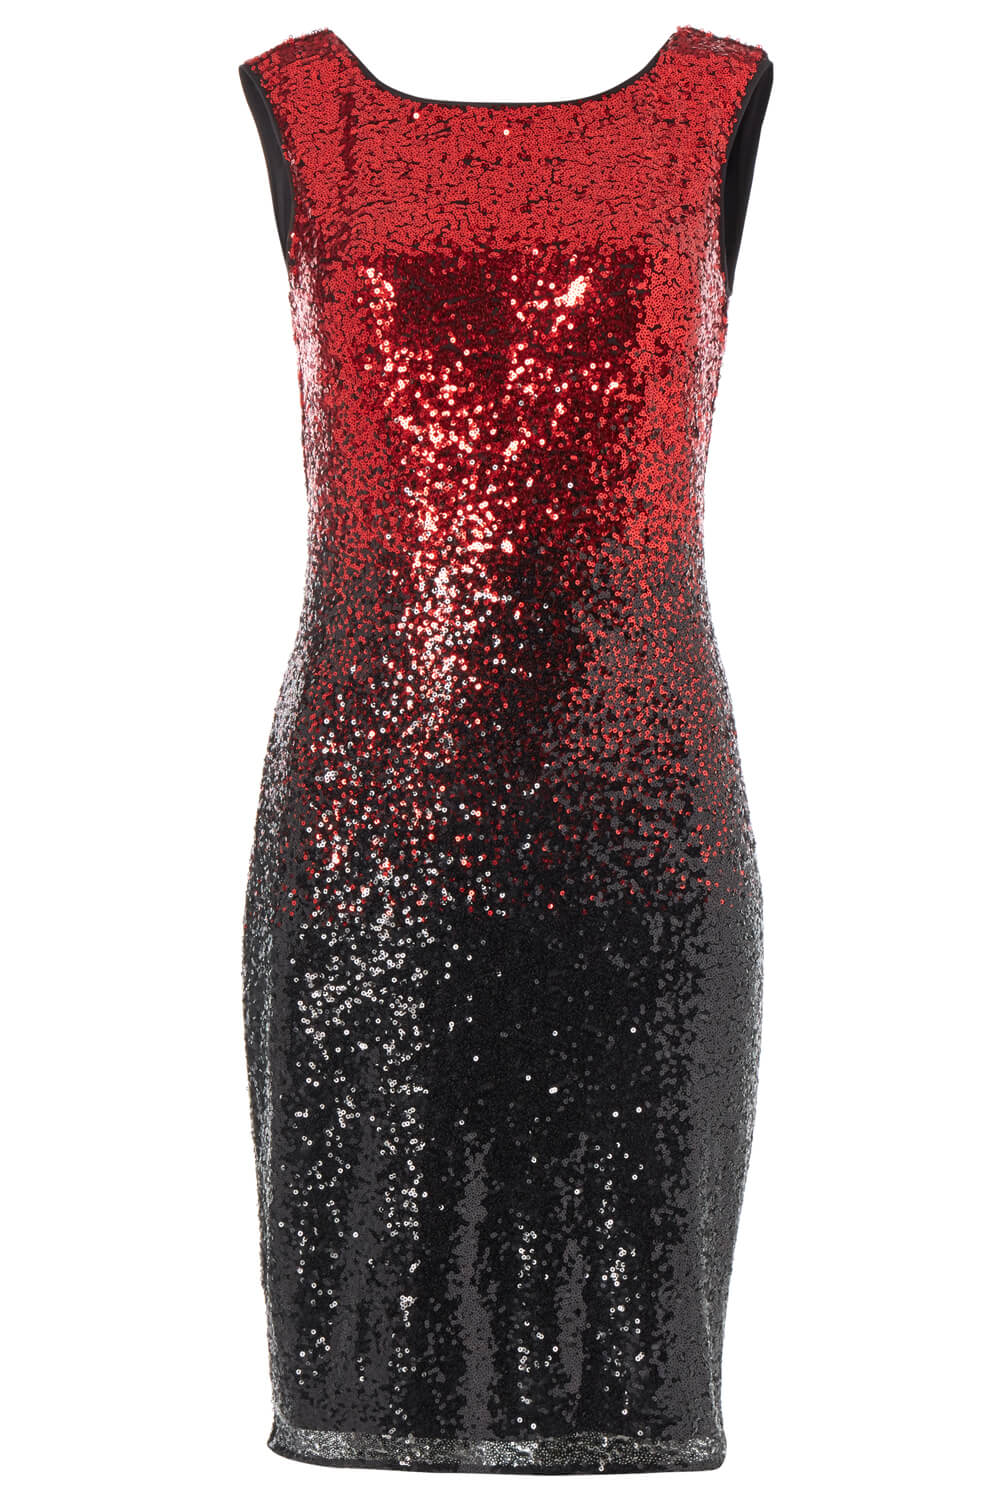  Ombre Sequin Embellished Mini Dress, Image 4 of 4